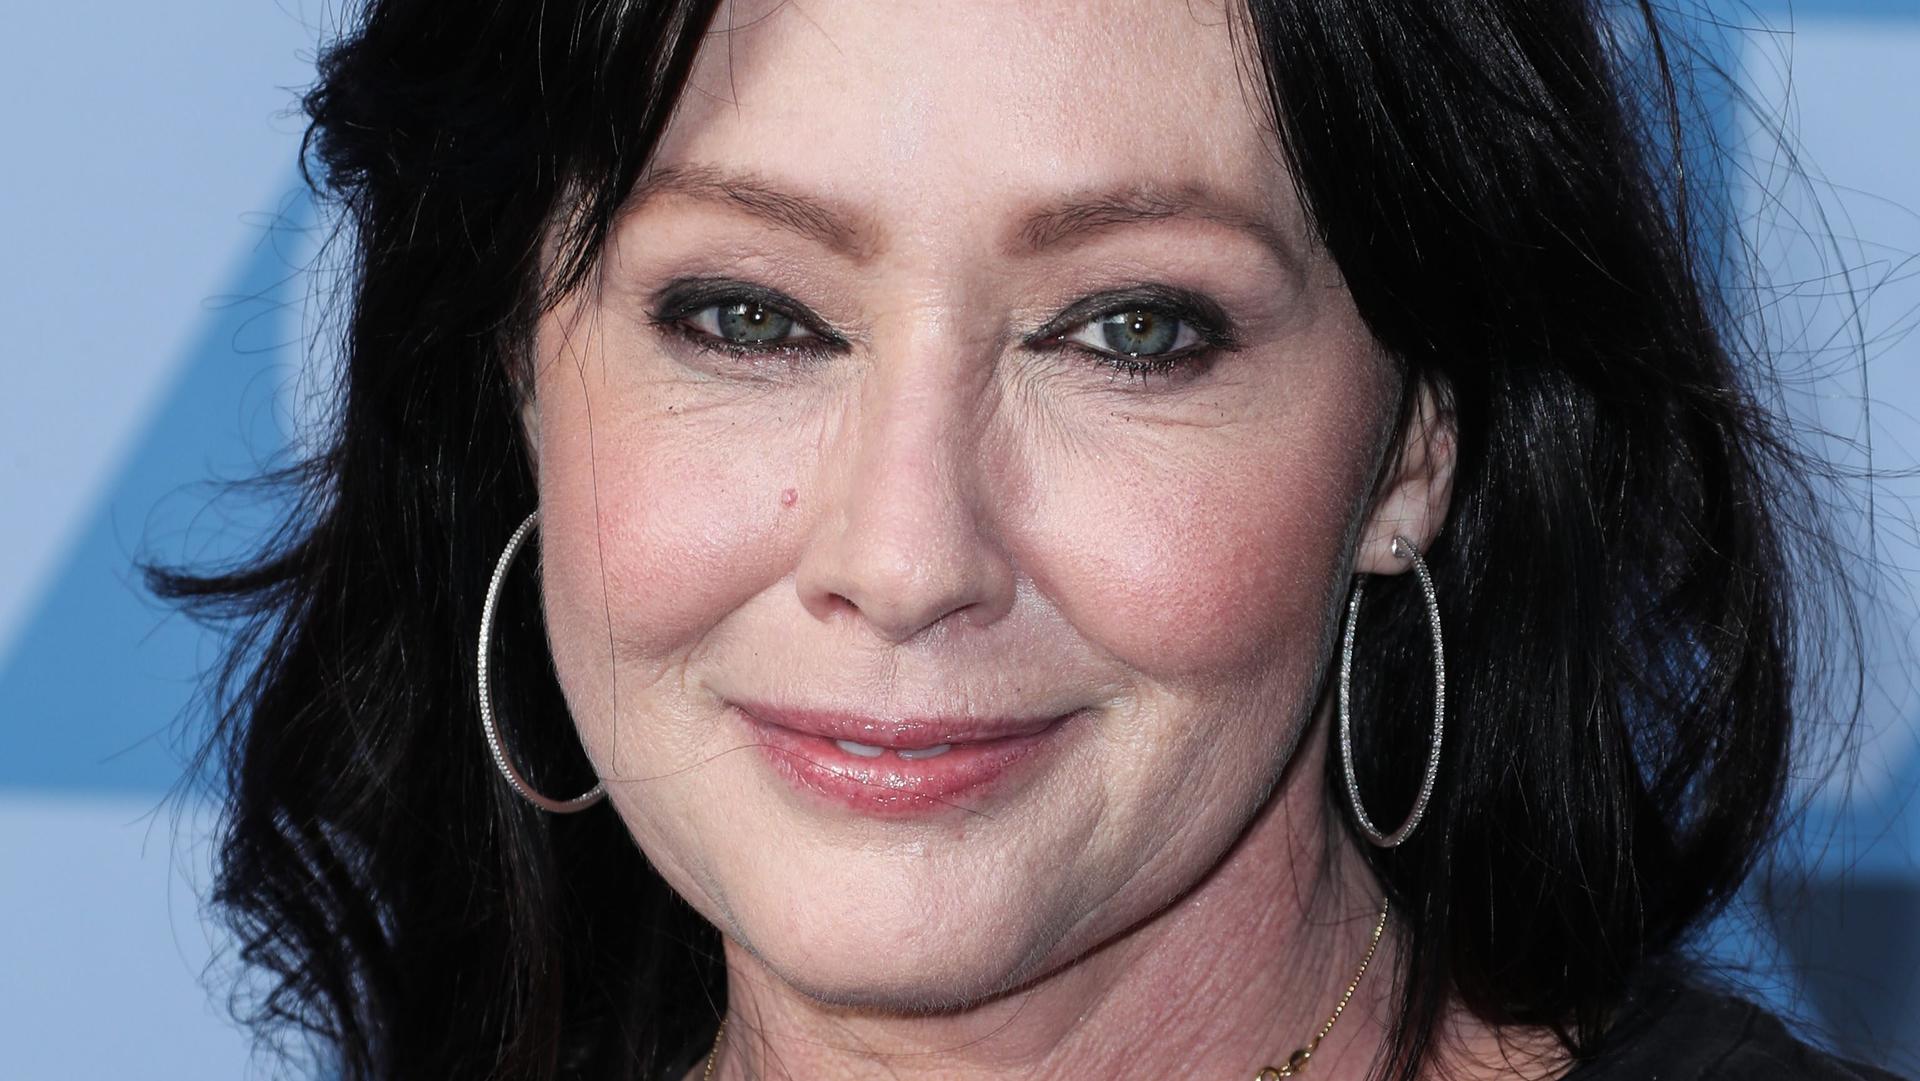 Doherty photos of shannen Shannen Doherty